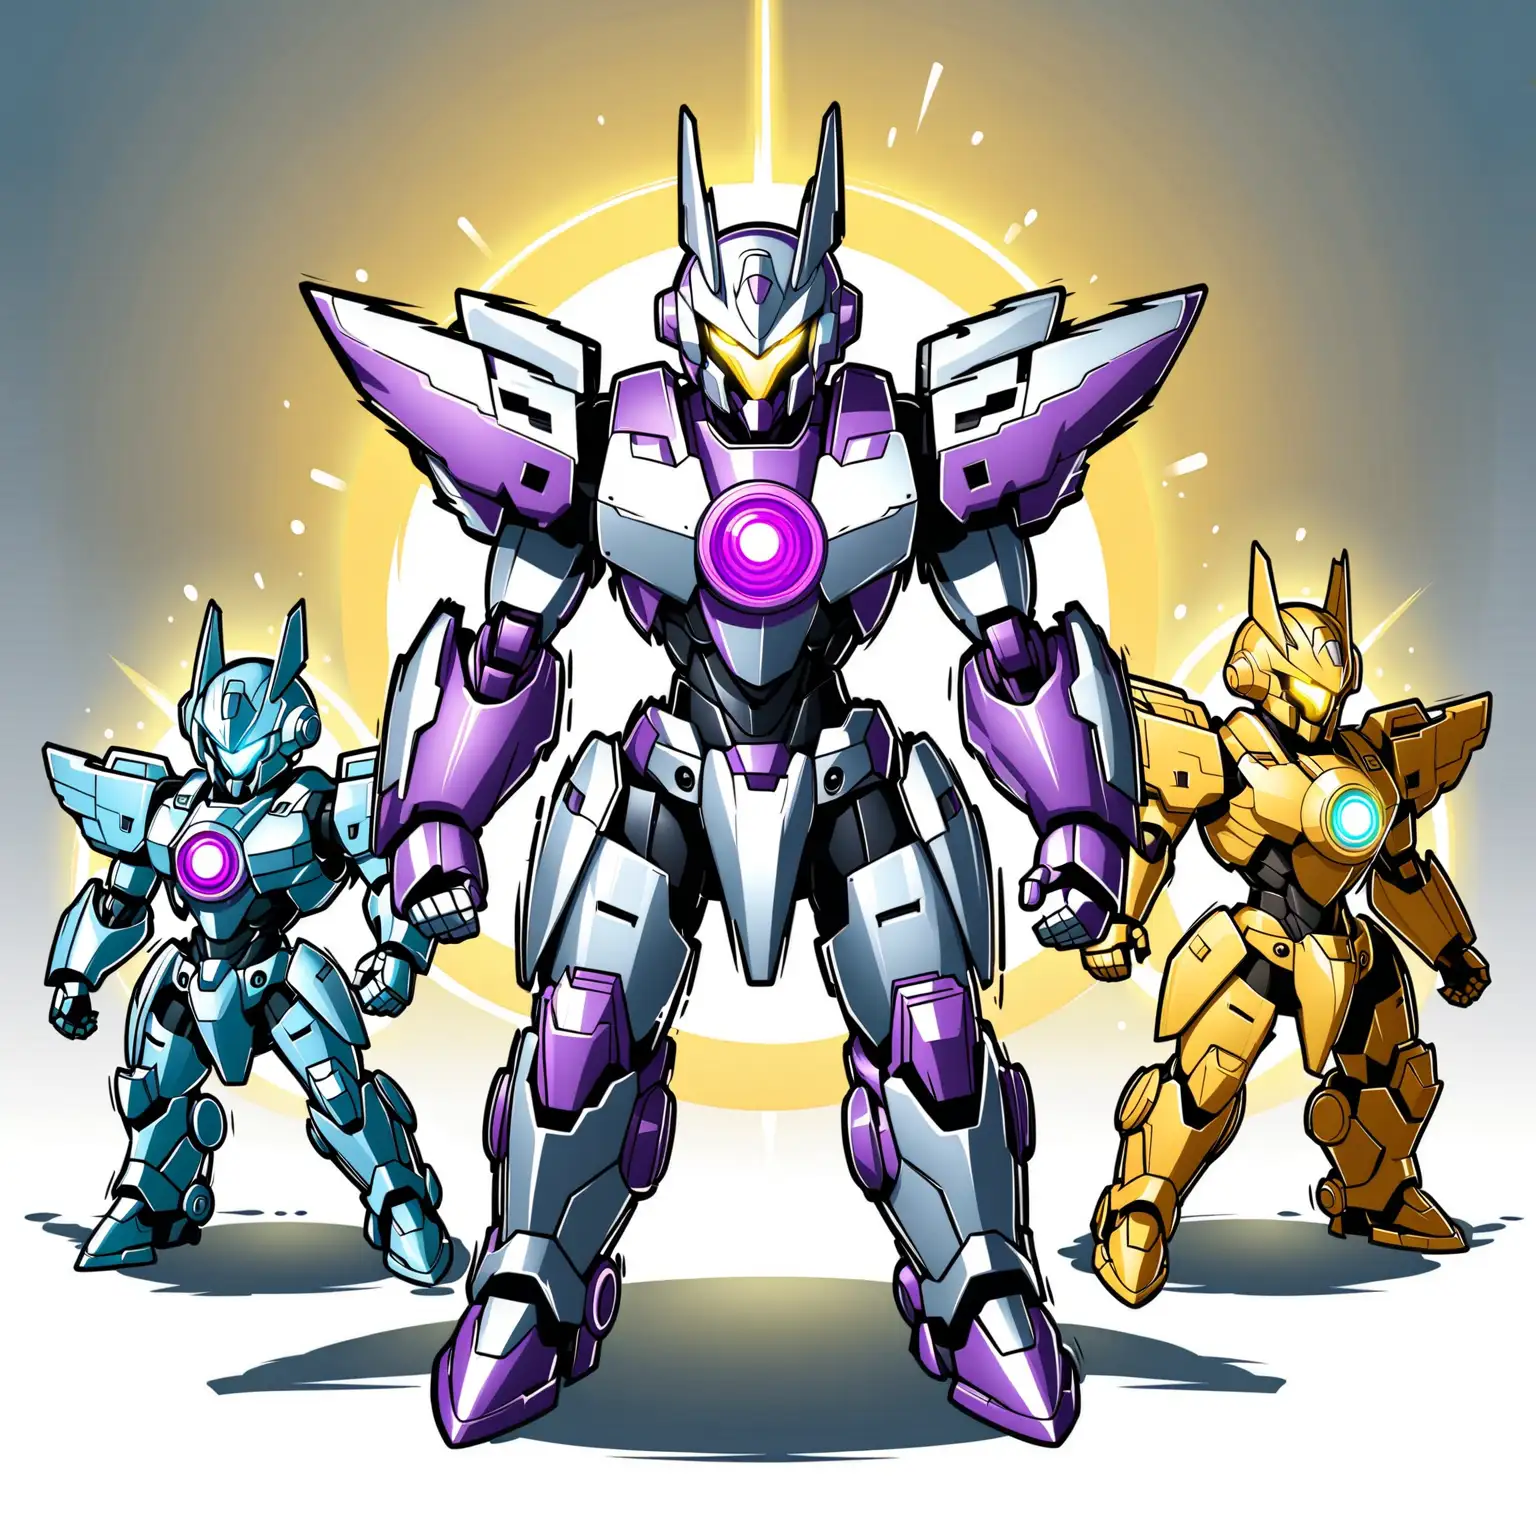 Mecha helmet, faceless, chibi, Q version shape, Q version mecha warrior, two body proportions, an Ultraman style mecha robot, combat status, rich actions, combat mode, blank background, purple Mecha, silver armor, black tights, yellow glowing eyes with 2 horns, silver breastplate, chestplate without glowing circles, combat status, full body perspective, looking at the audience. jump